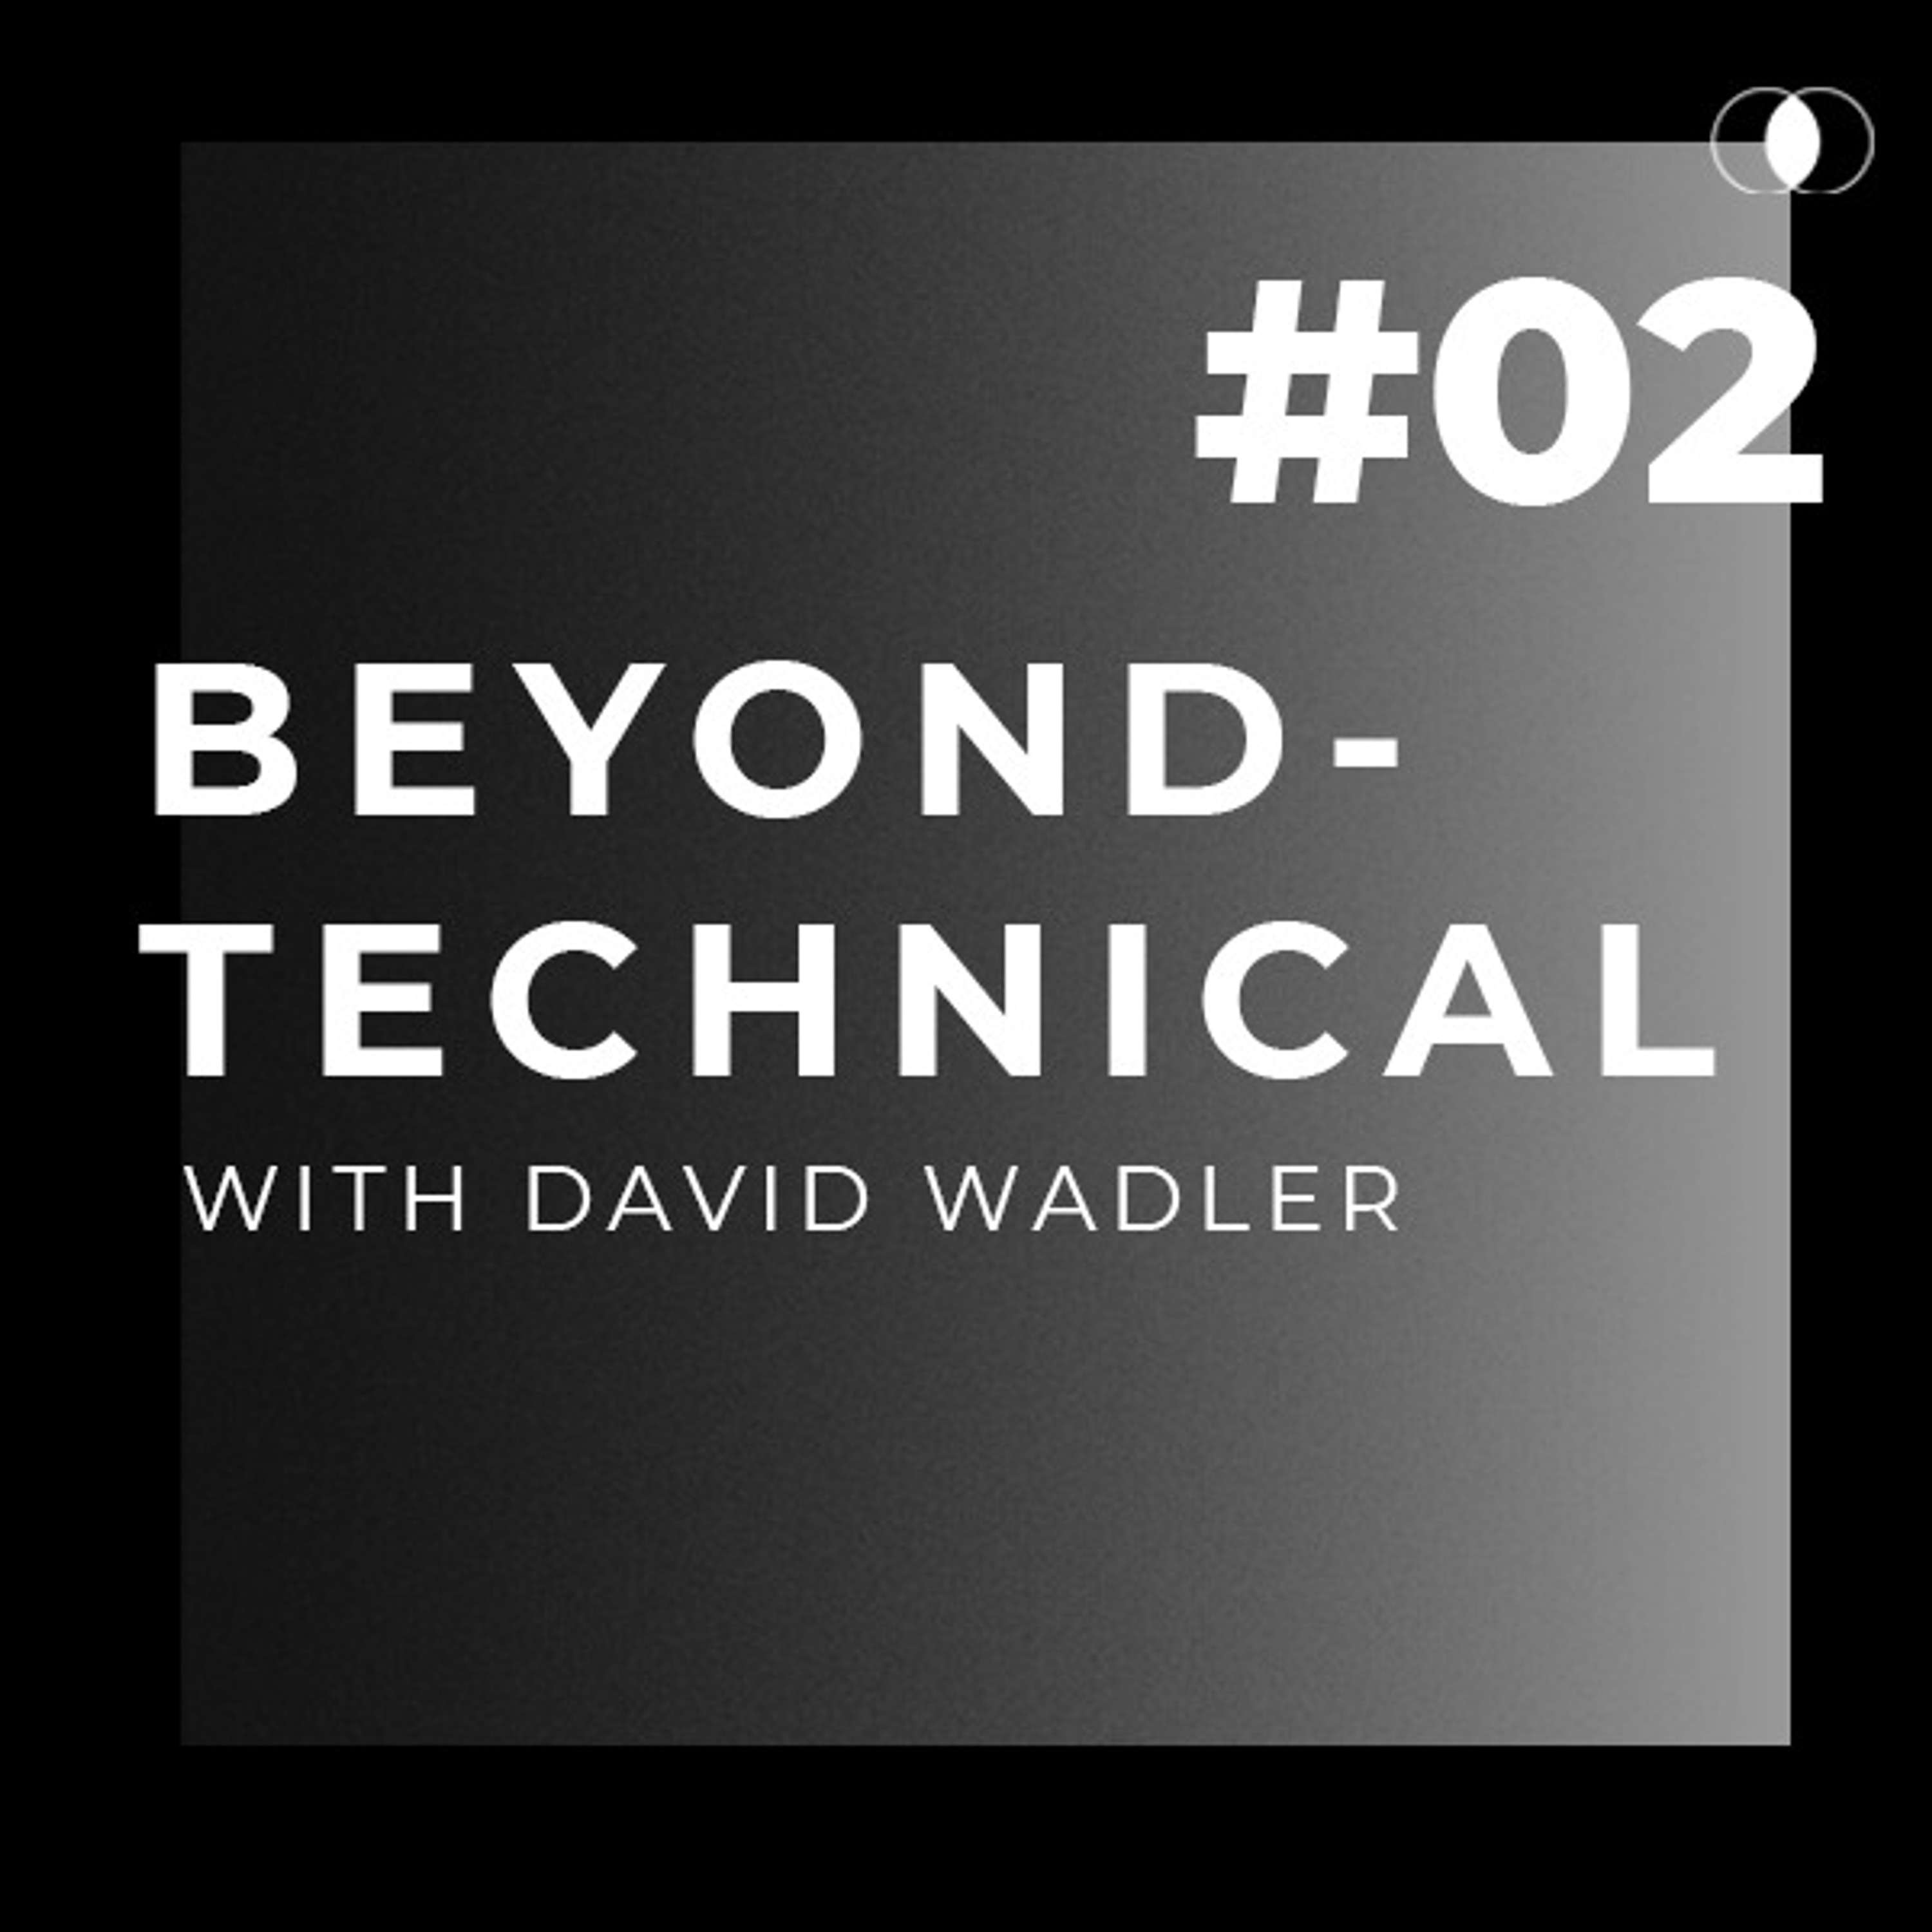 Unstoppable founders who make things happen | #02 Beyond Technical - David Wadler and Daniel Weinmann